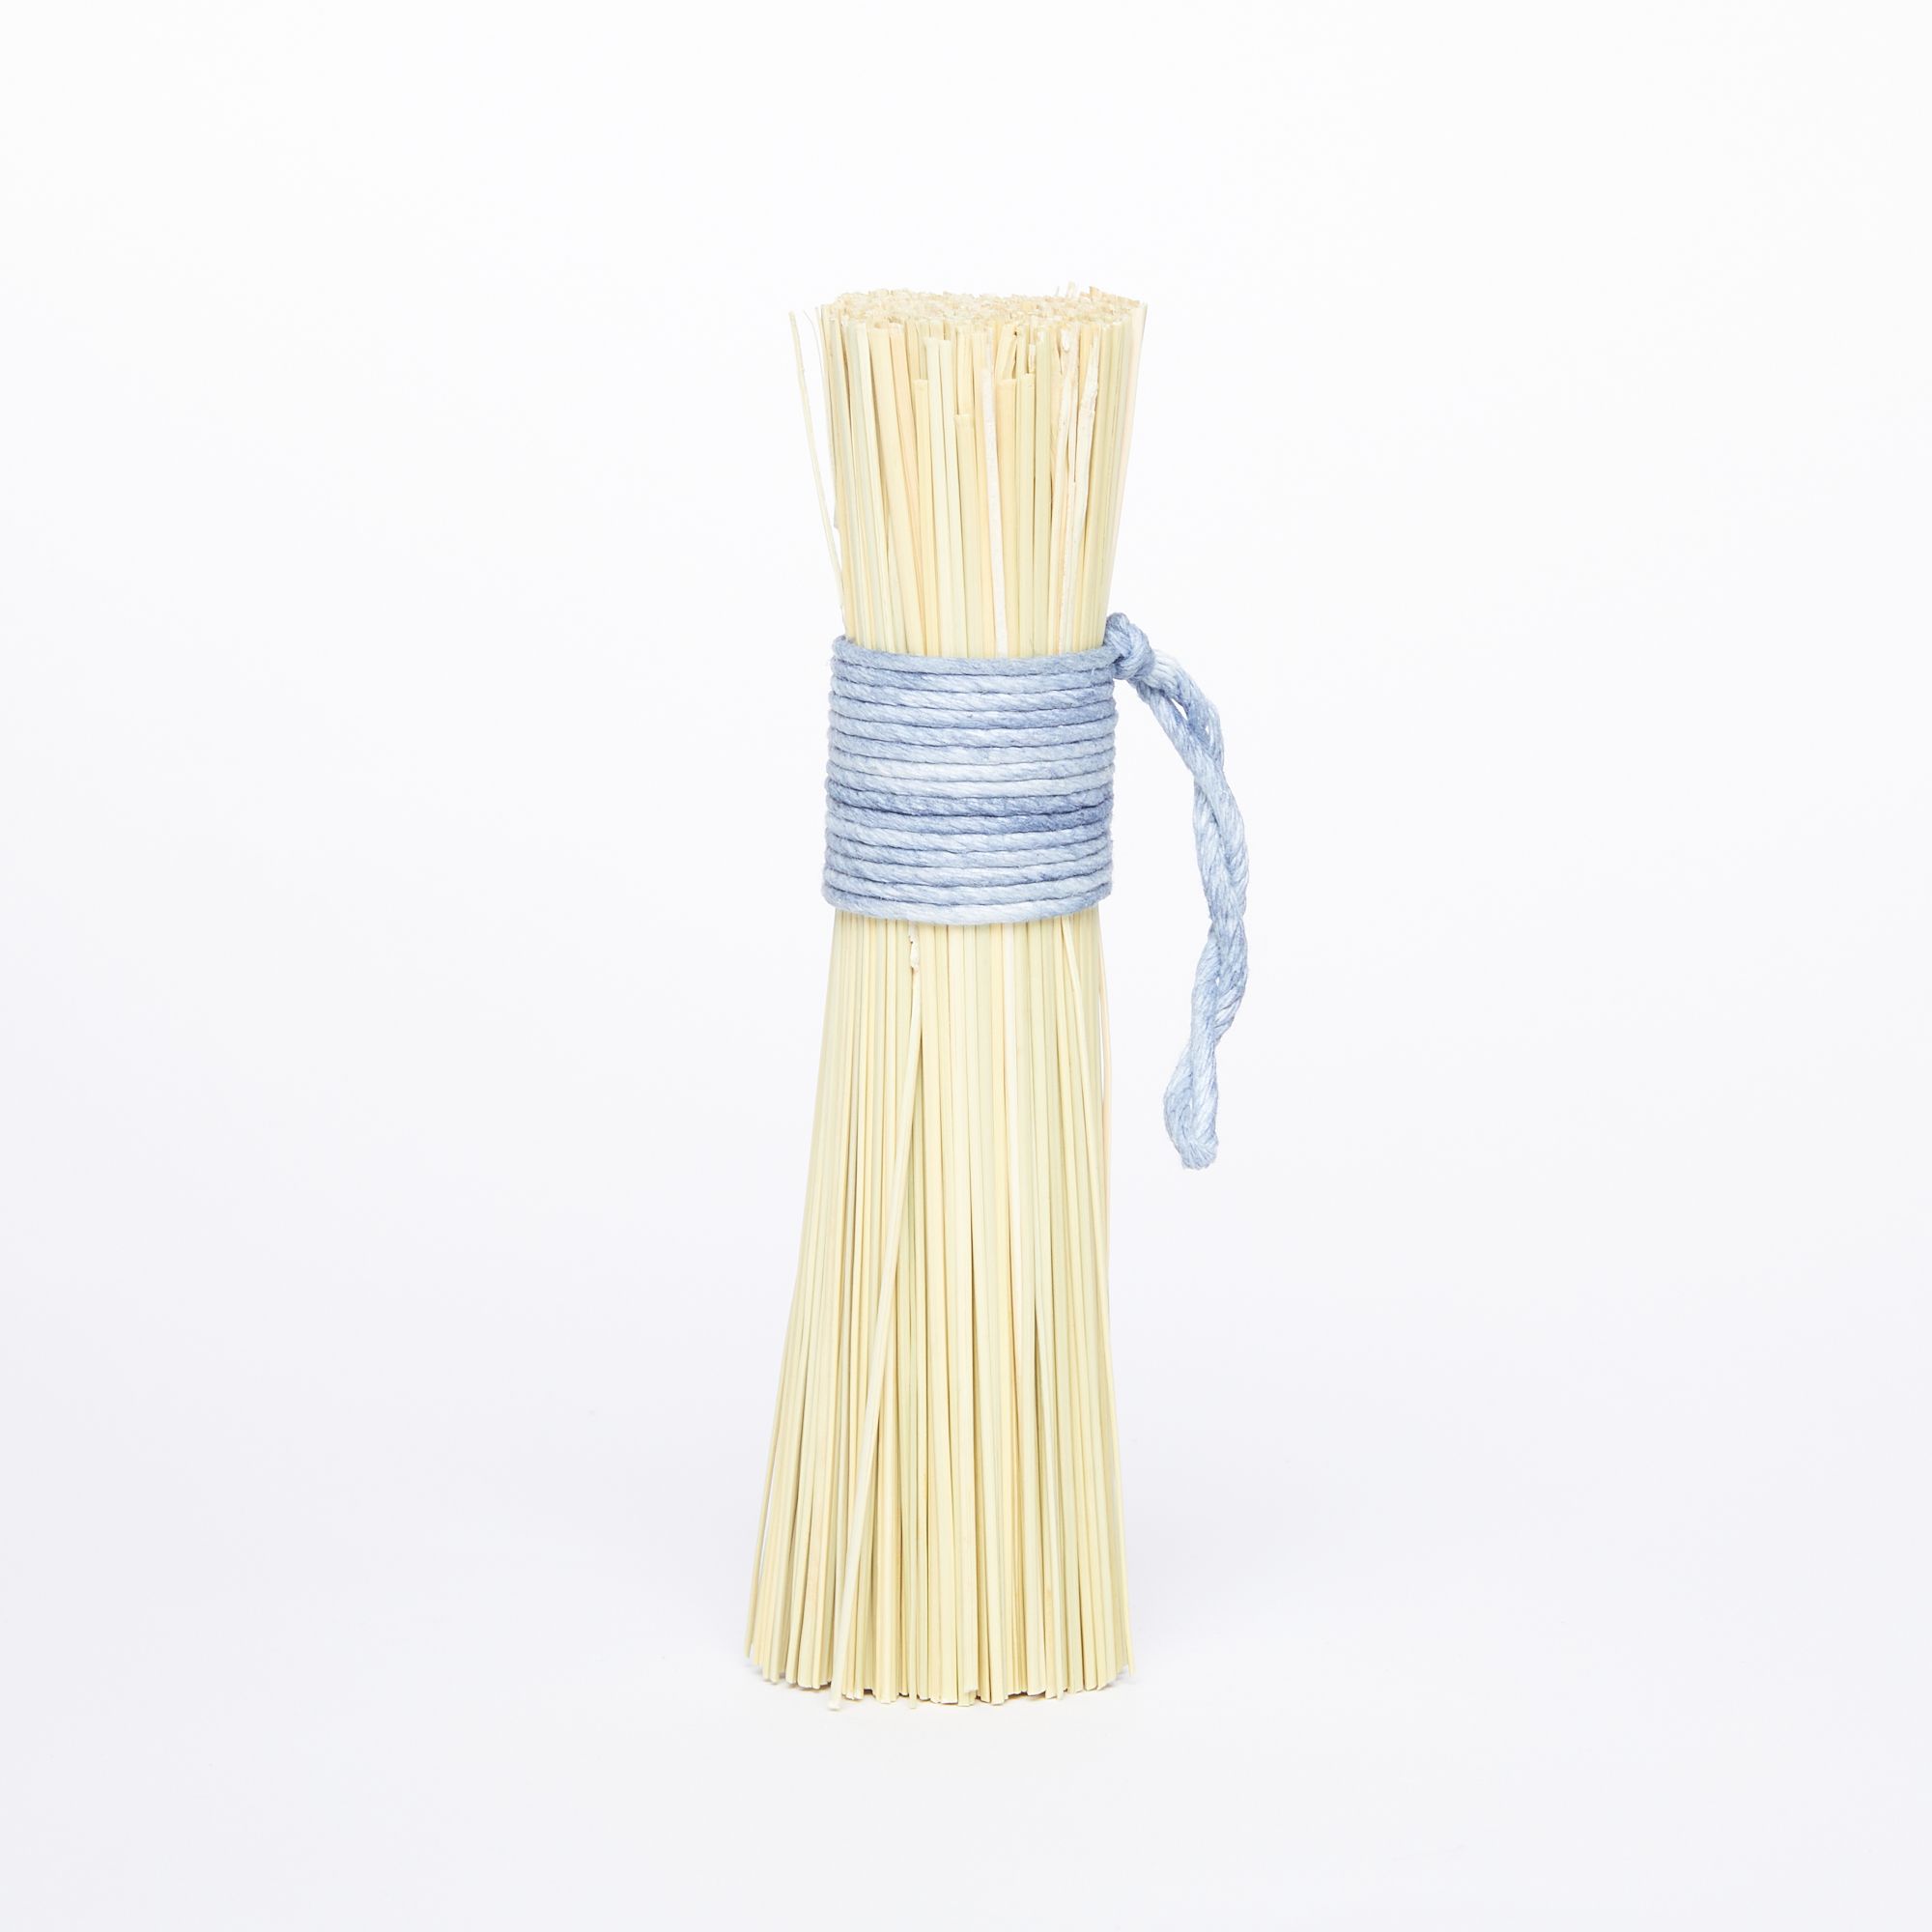 A pot scrubber made from a bundle of broomcorn tied at the handle with blue string